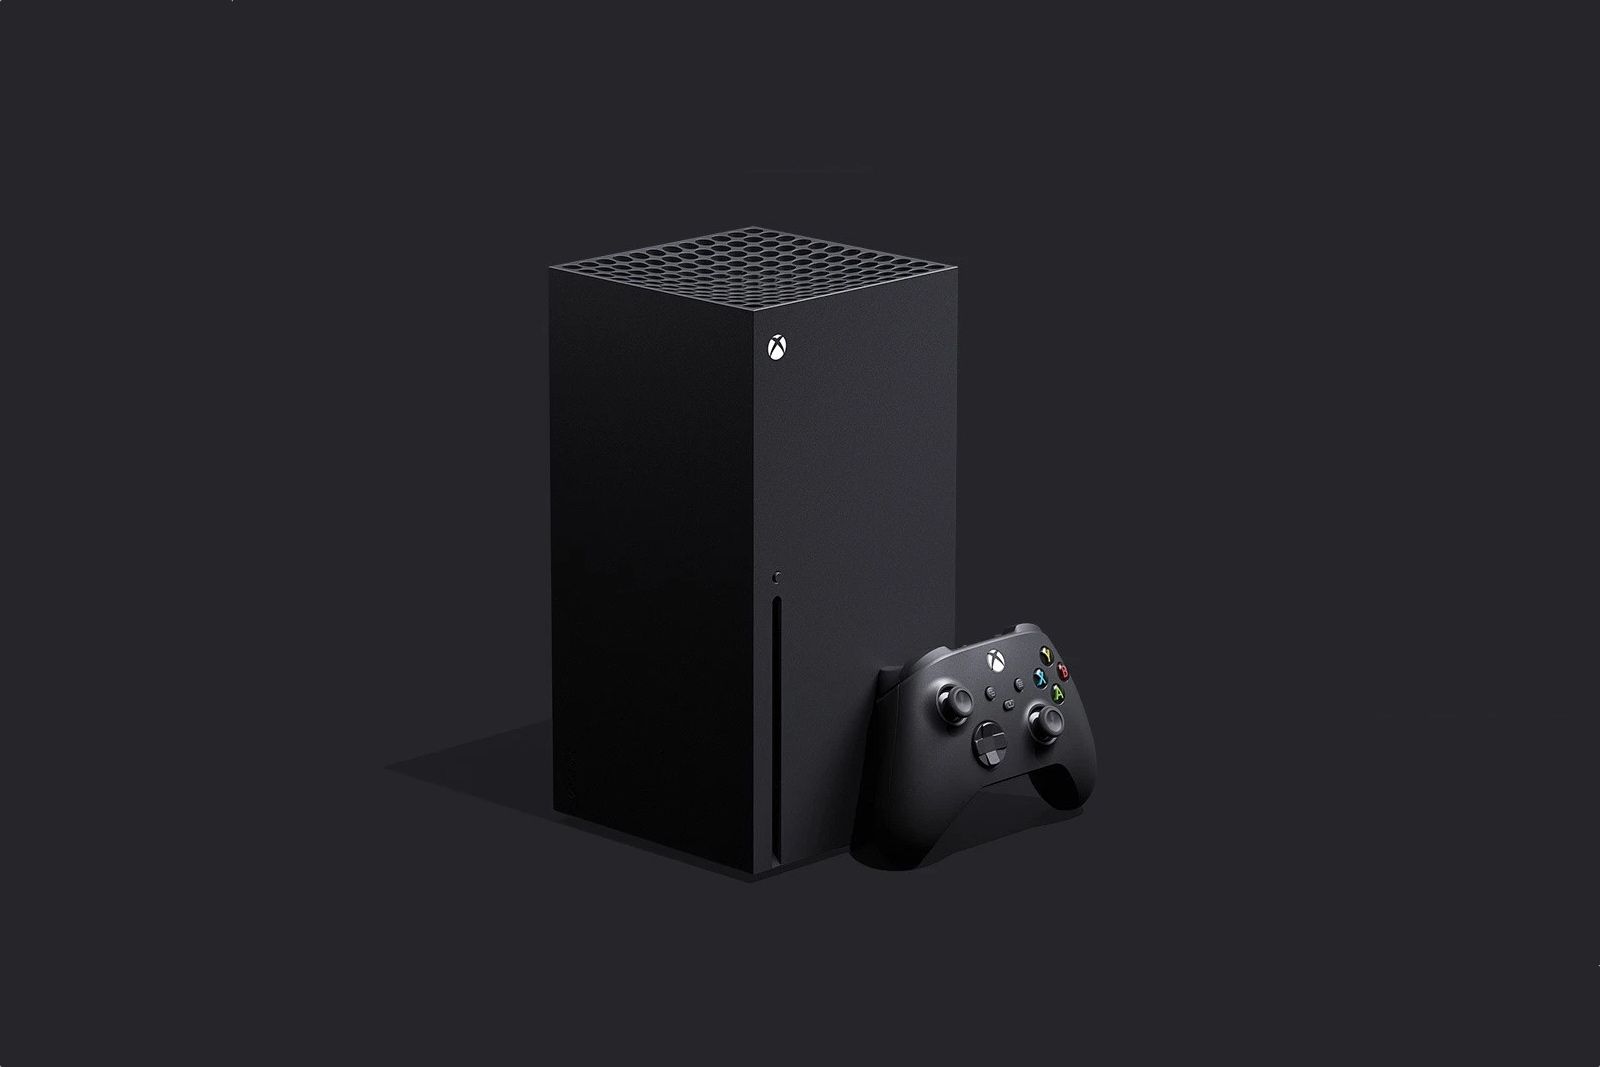 Microsoft confirms 12 teraflops of power and more technical specs for Xbox Series X image 1